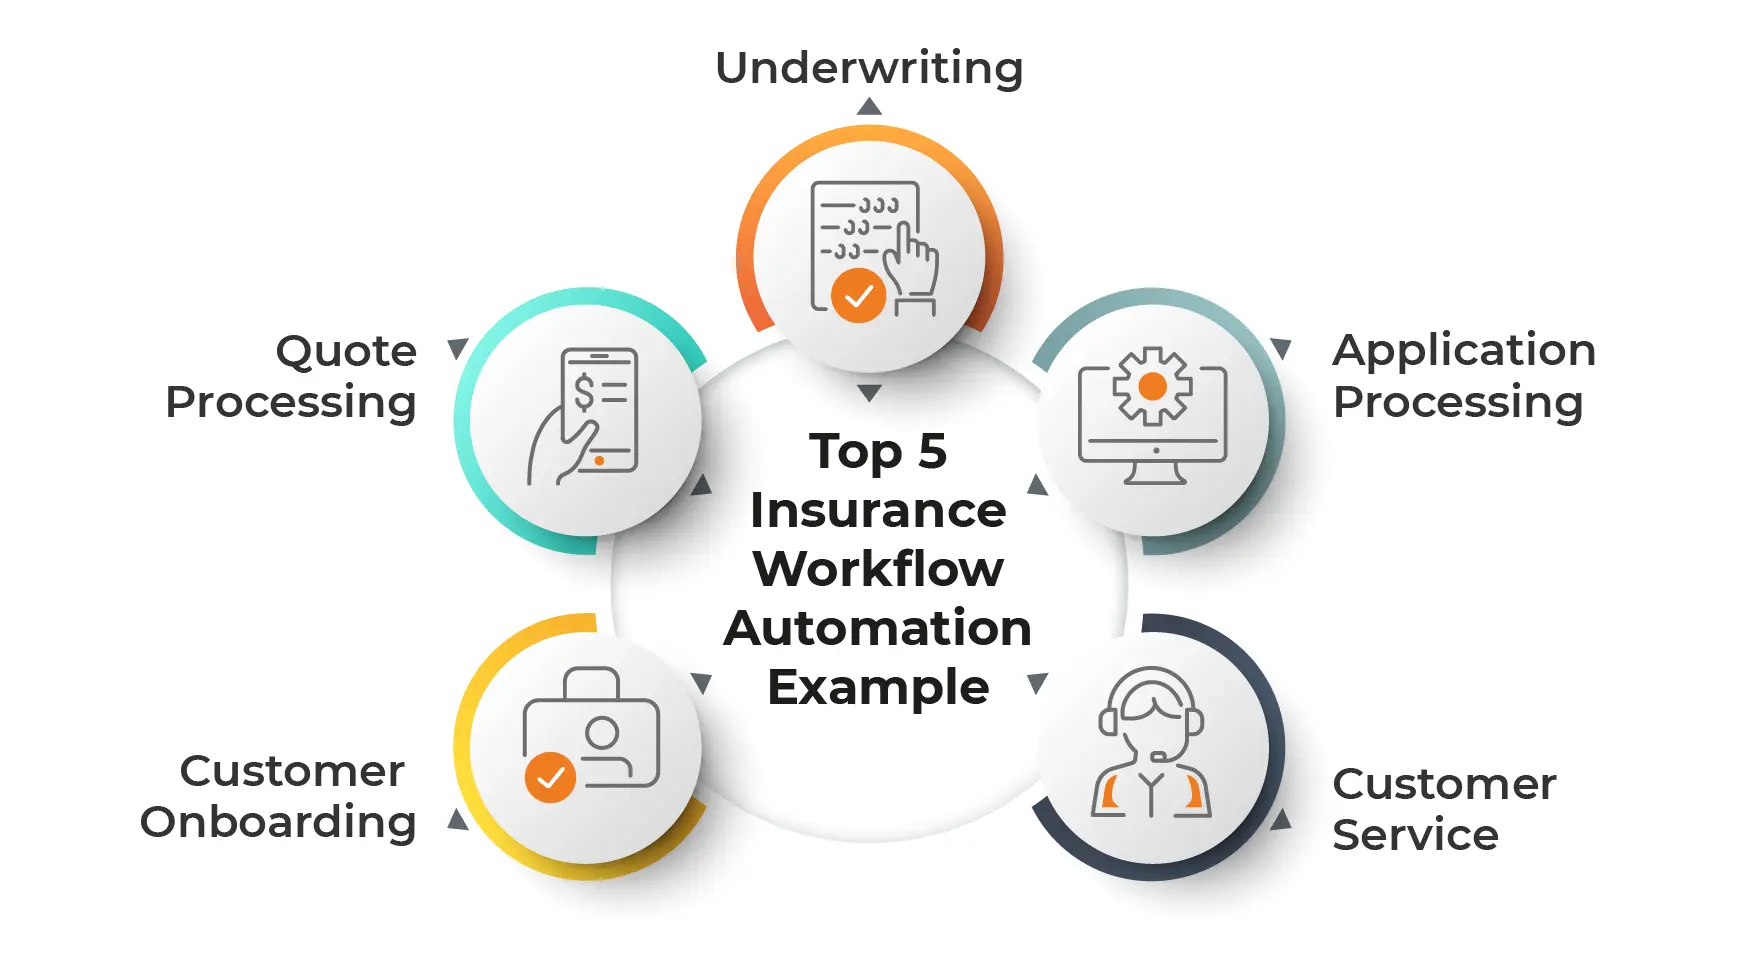 Top 5 Insurance Workflow Automation Example